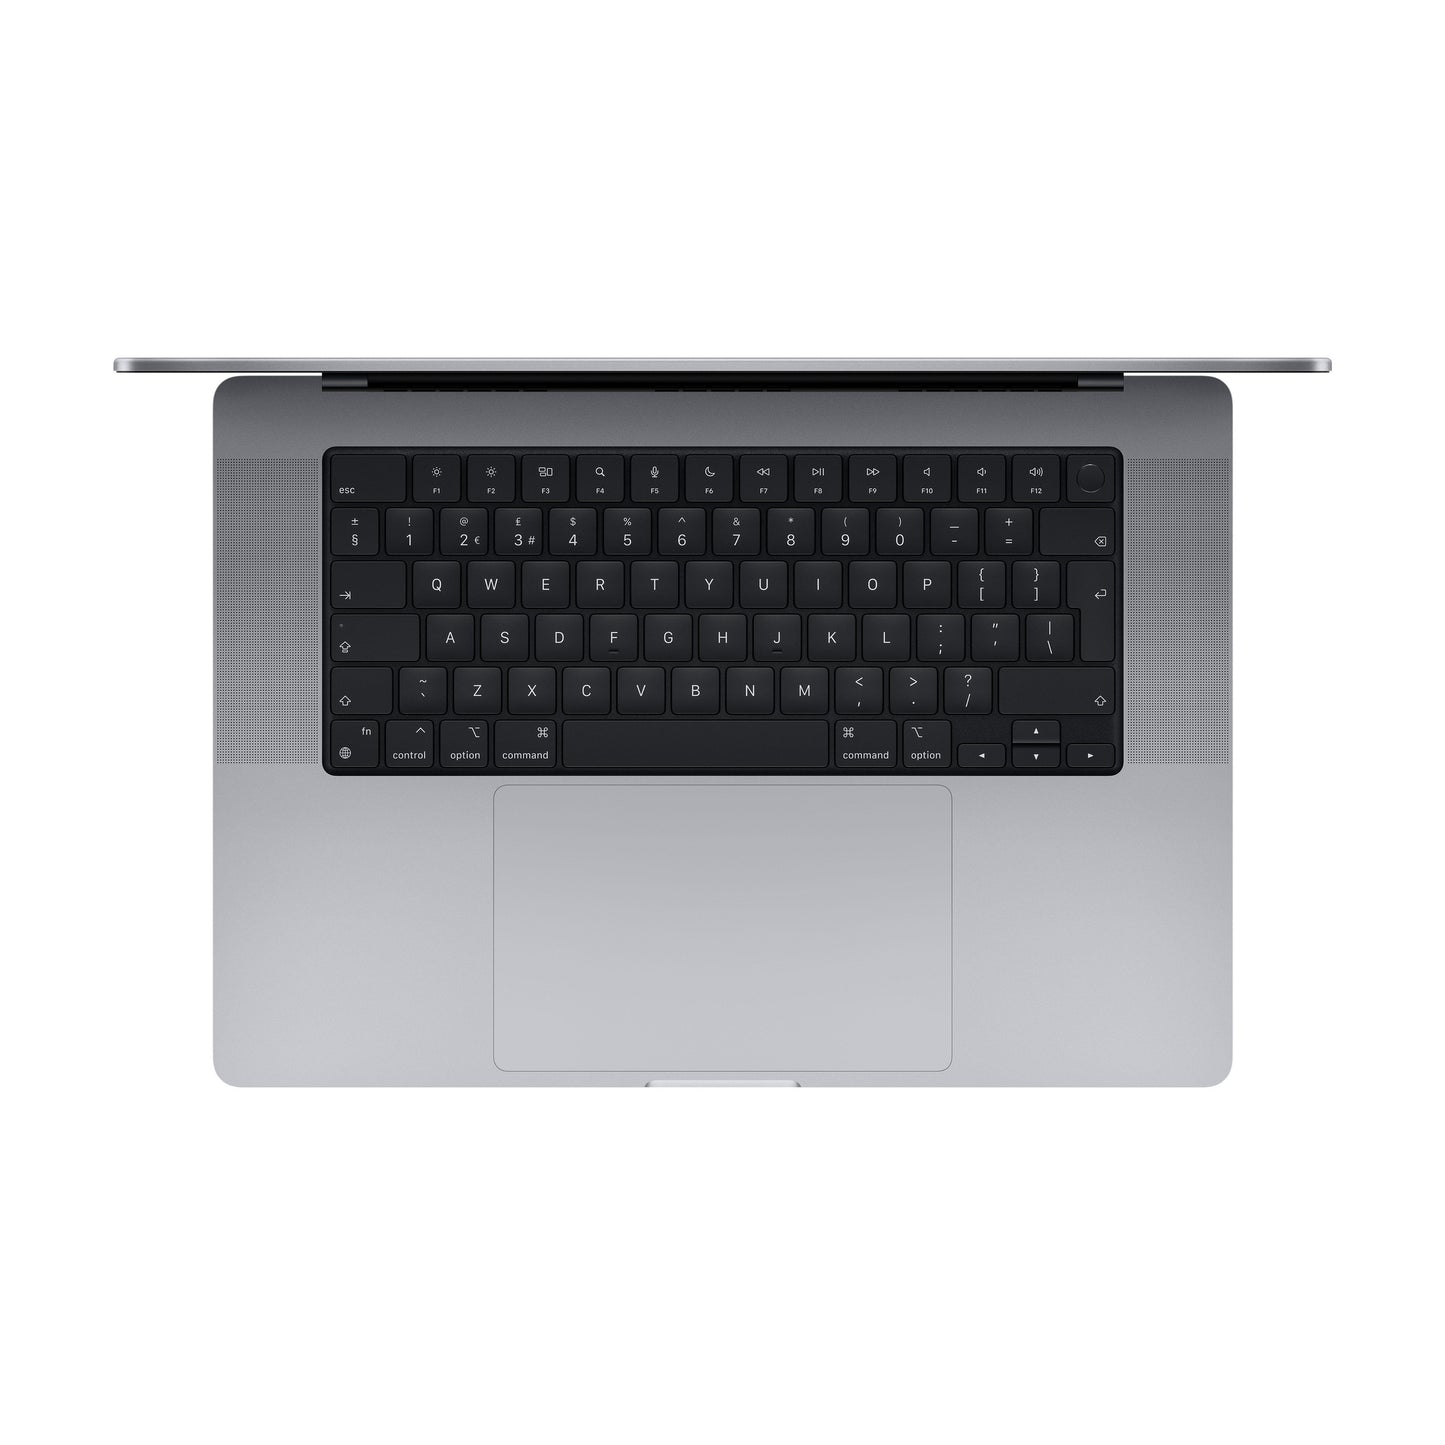 16-inch MacBook Pro: Apple M1 Pro chip with 10‑core CPU and 16‑core GPU, 1TB SSD - Space Grey